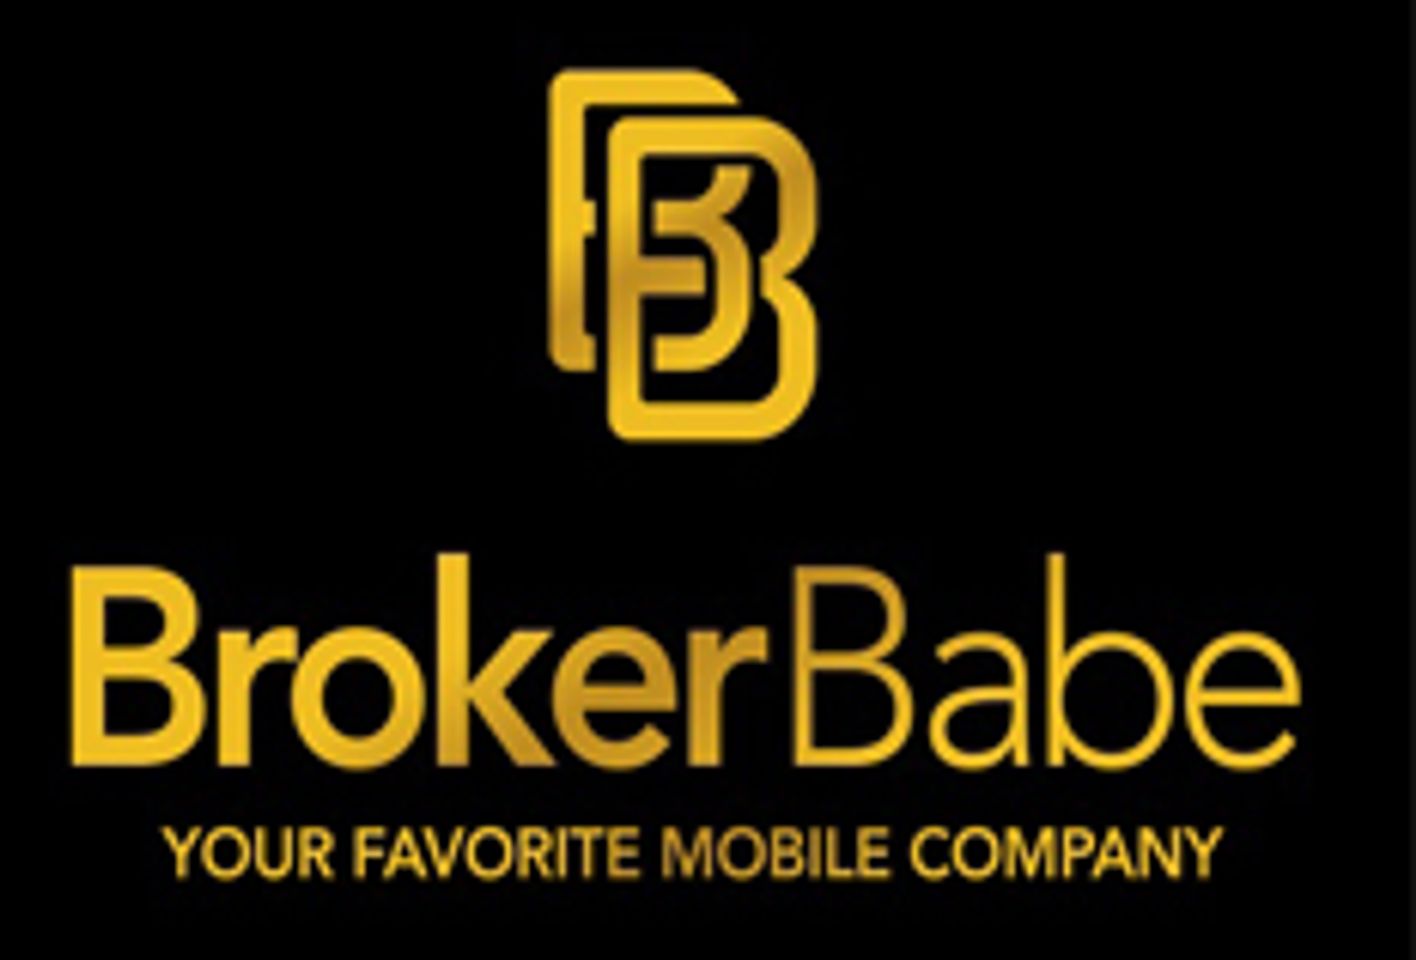 Brokerbabe.com Adds European Android VOD Apps